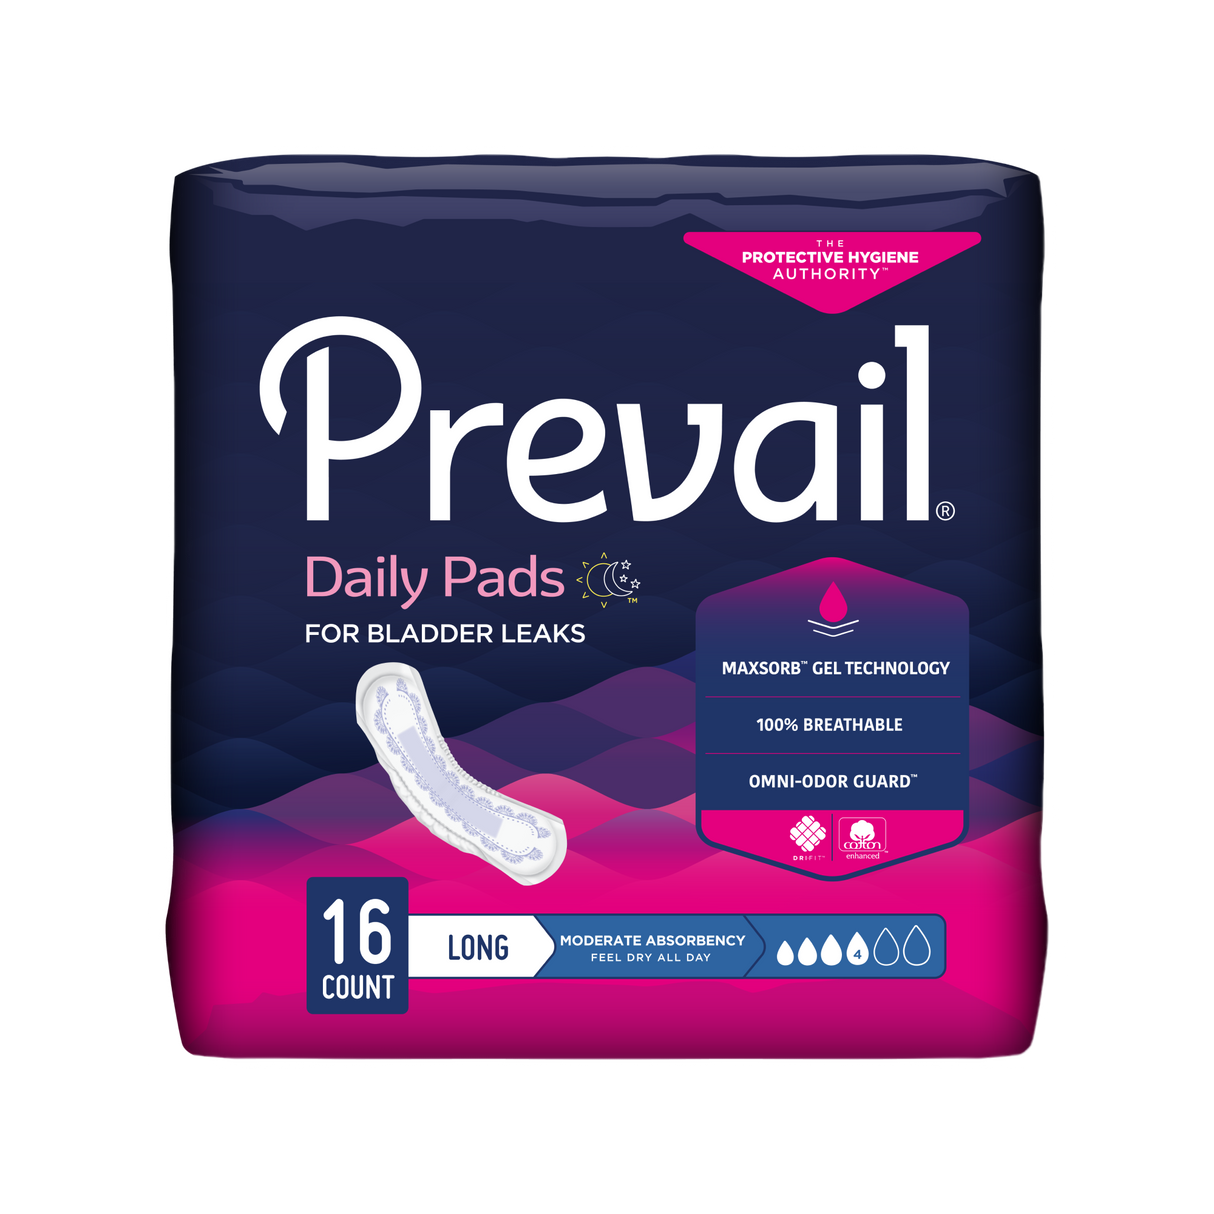 Prevail Incontinence Bladder Control Pads for Women, Moderate